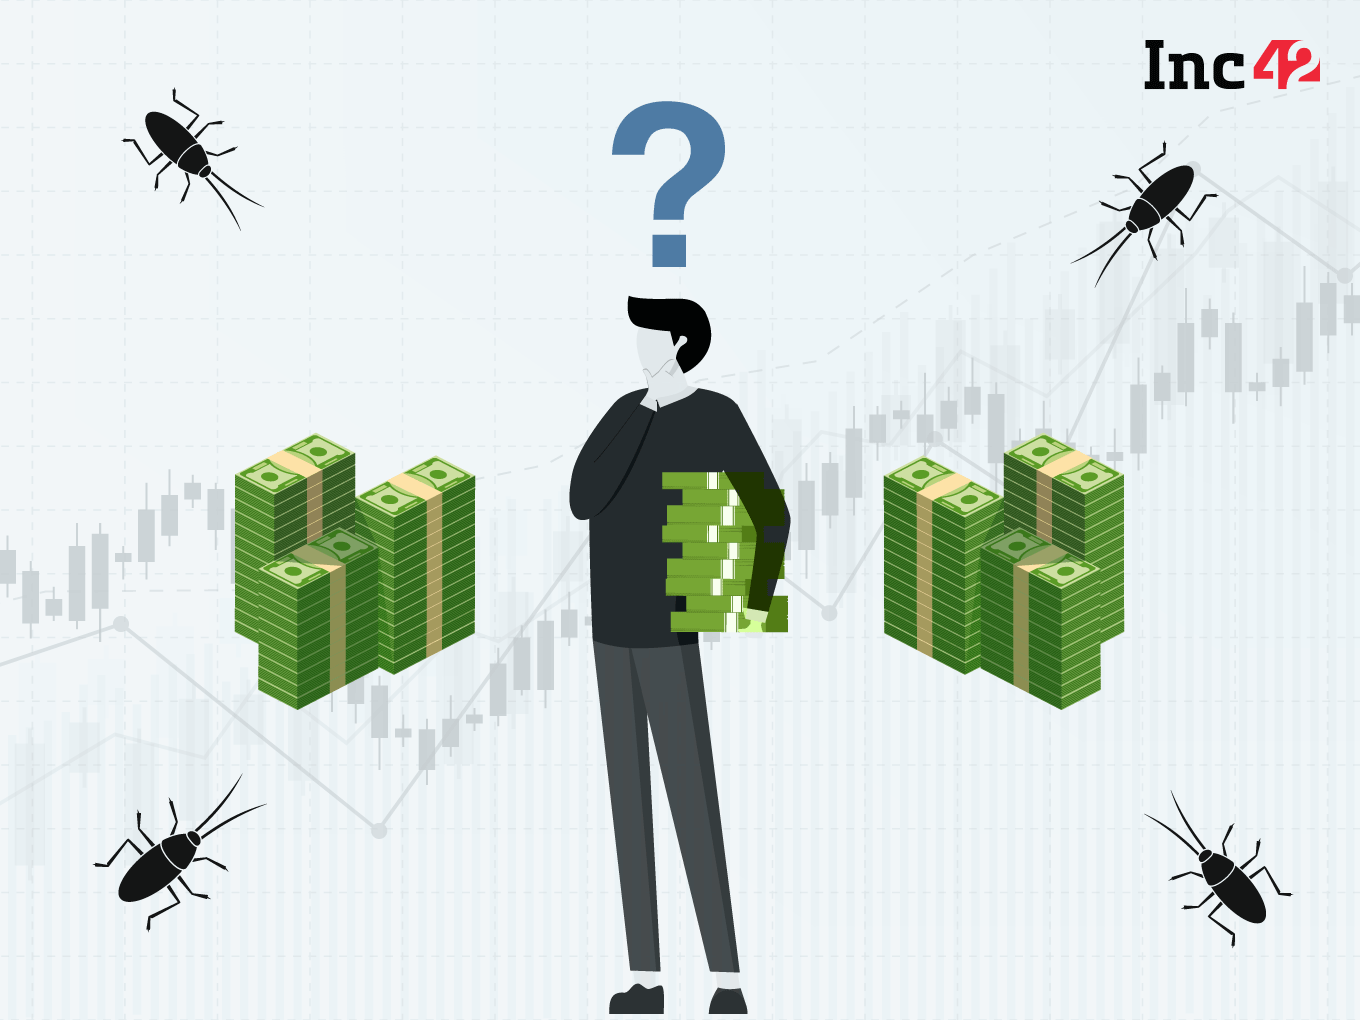 #Year Of Cockroach Startups: How To Think Like A Cockroach To Stay Cash Rich?